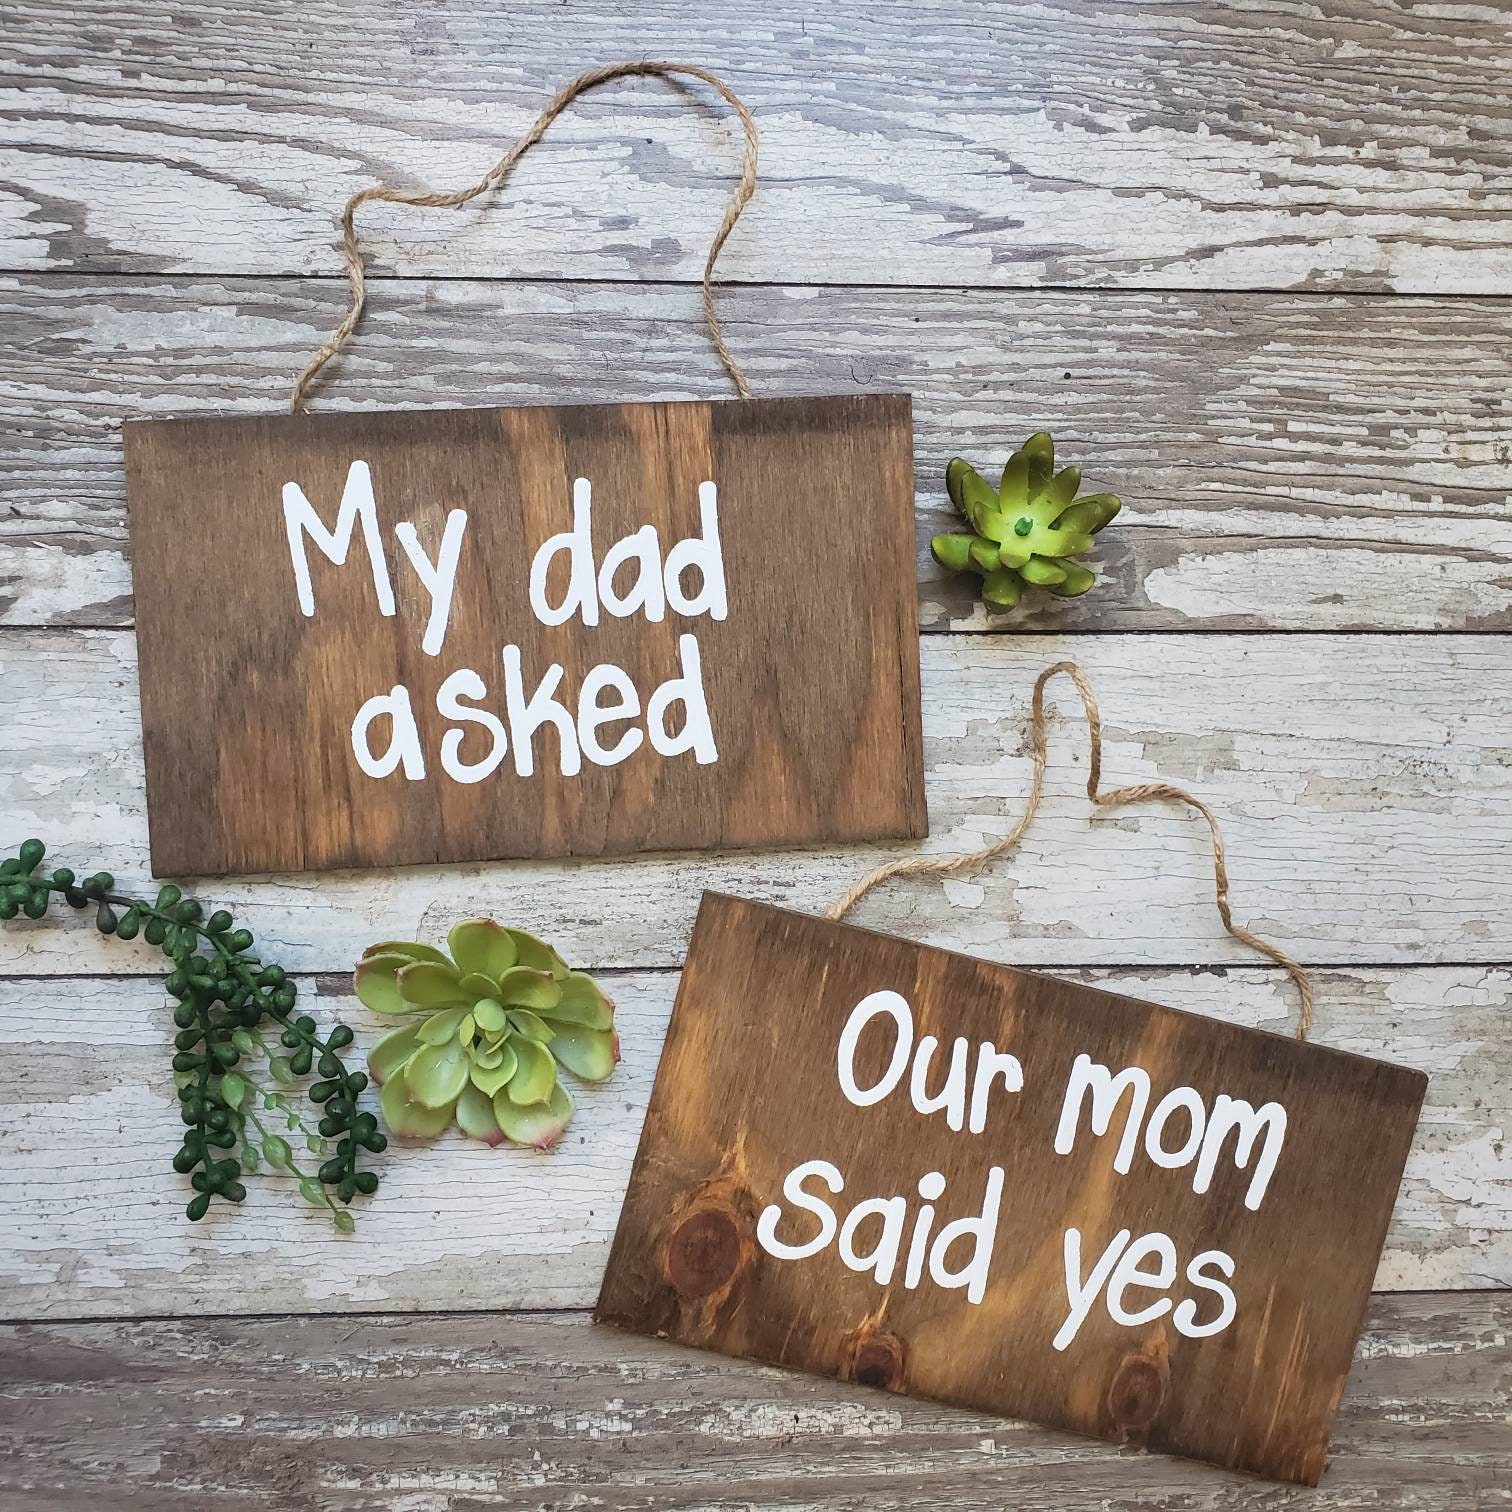 Blended Family Engagement Sign, Engagment Announcement, Wood Signs, My Mom Said Yes, Our Dad Asked, Wedding, Step Mom